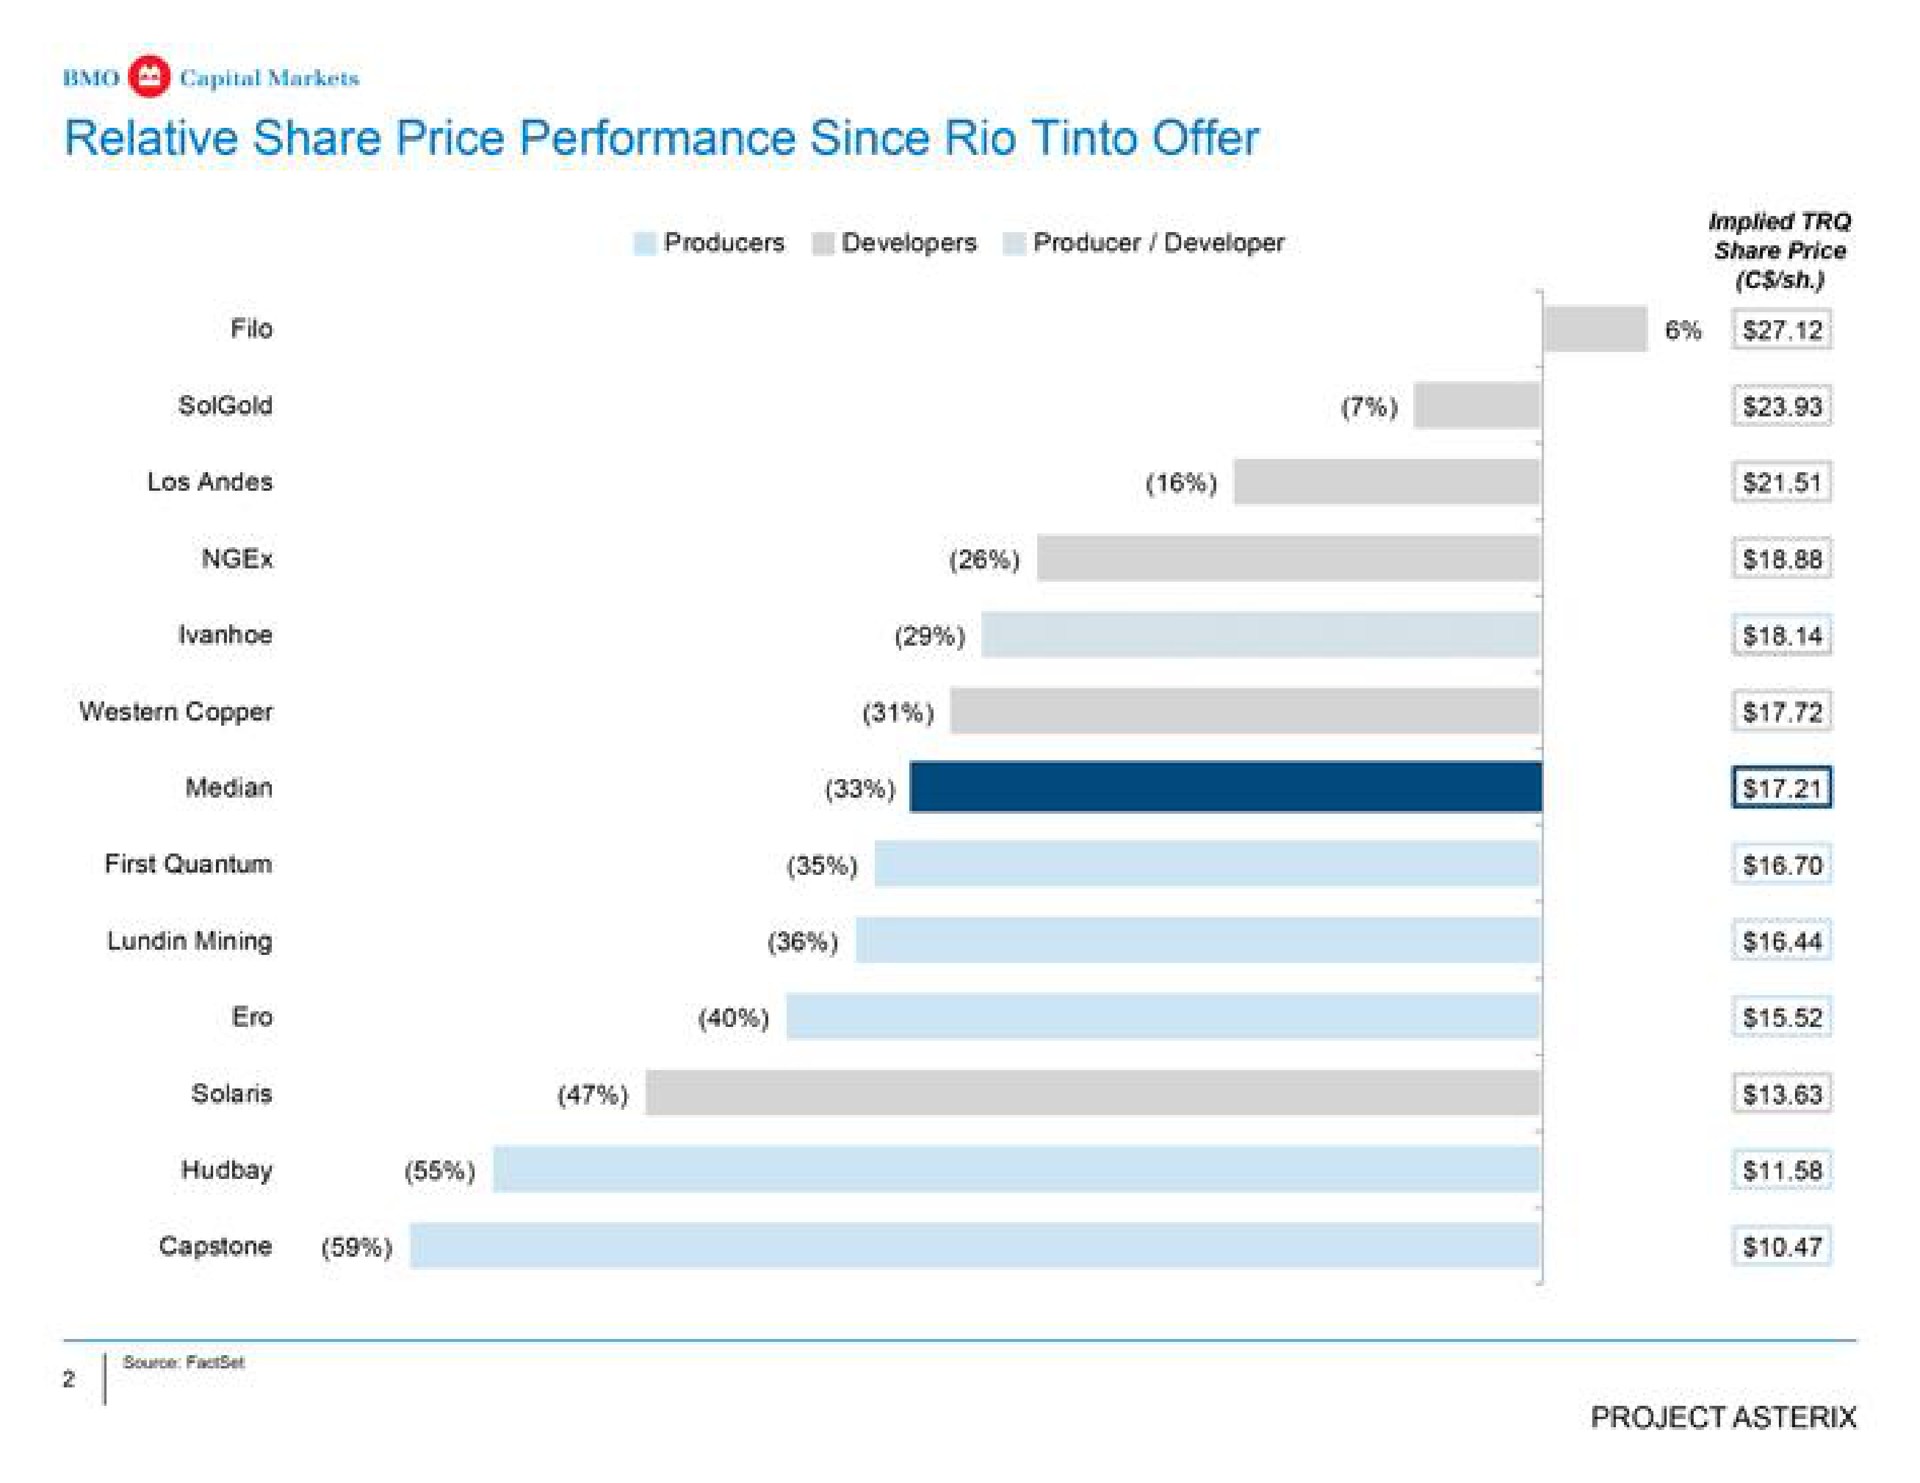 relative share price performance since rio offer | BMO Capital Markets